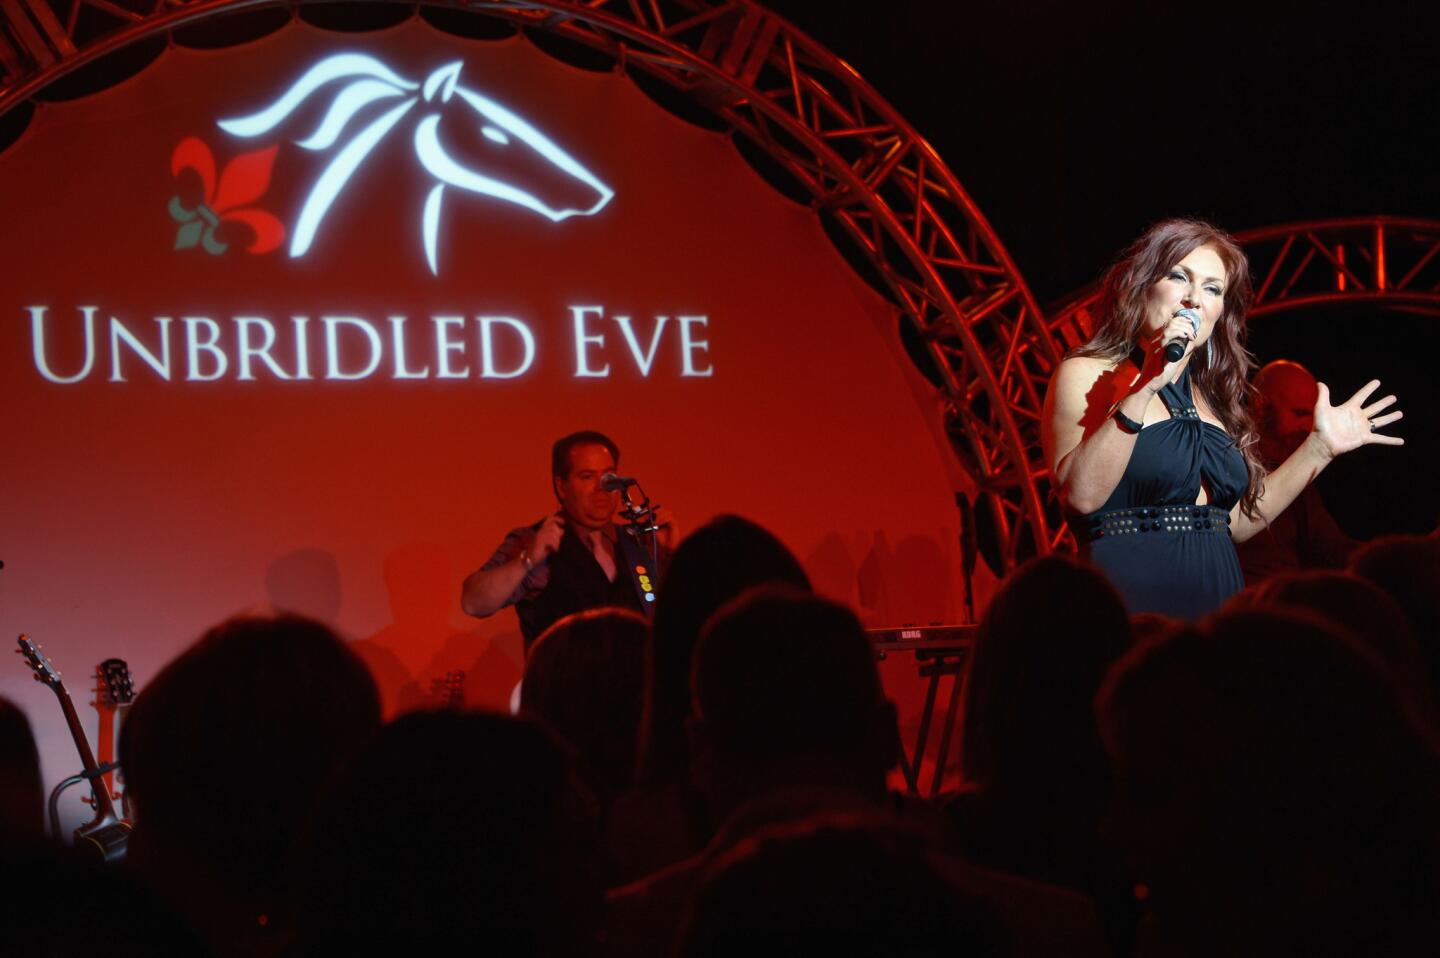 Jo Dee Messina attends the Unbridled Eve Gala for the 139th Kentucky Derby at The Galt House Hotel & Suites' Grand Ballroom on May 3, 2013 in Louisville, Kentucky.